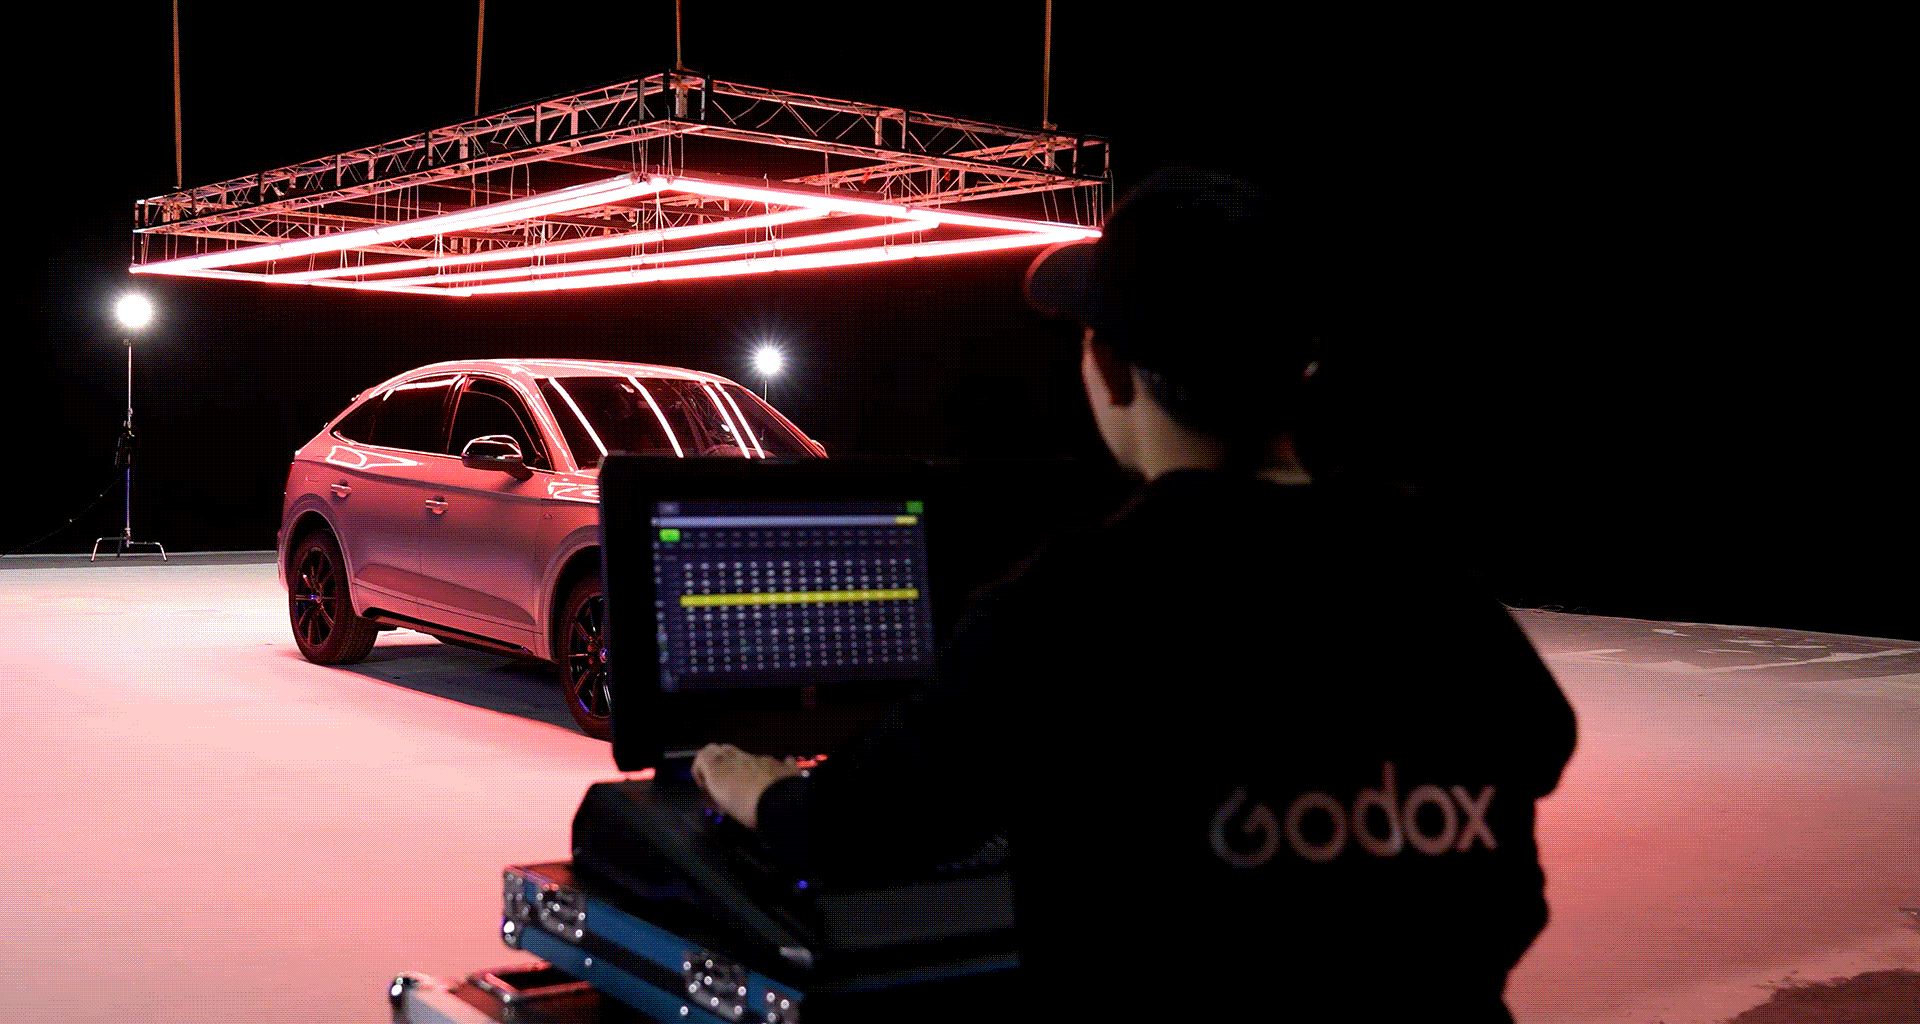 KNOWLED RGBWW Pixel Tube Light being controlled by a DMX control console